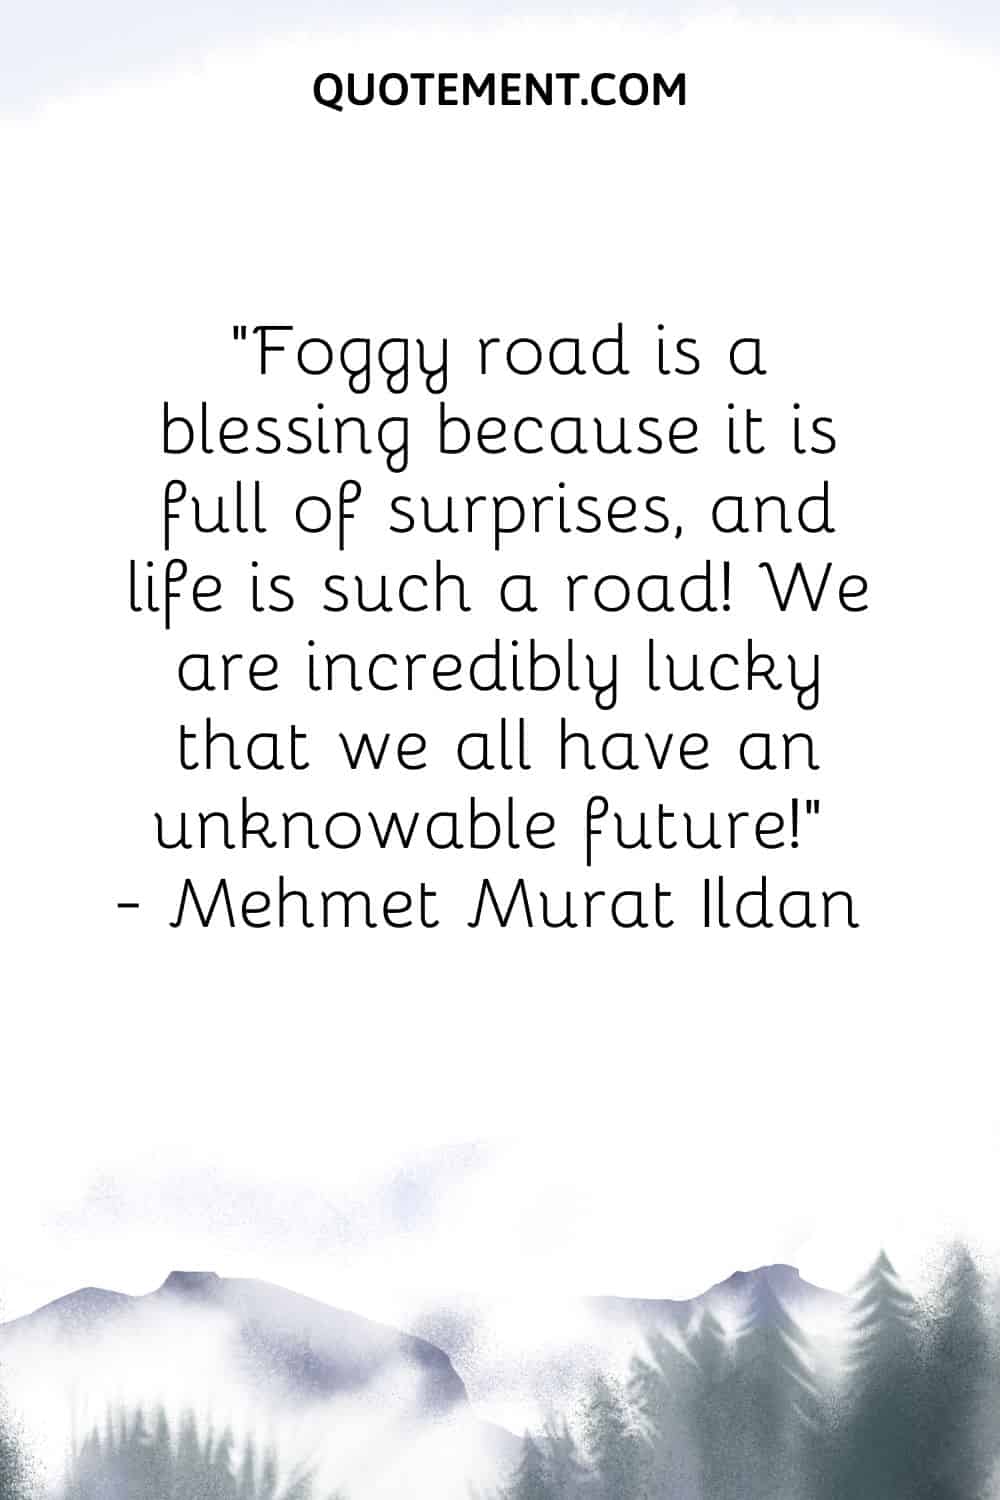 Foggy road is a blessing because it is full of surprises